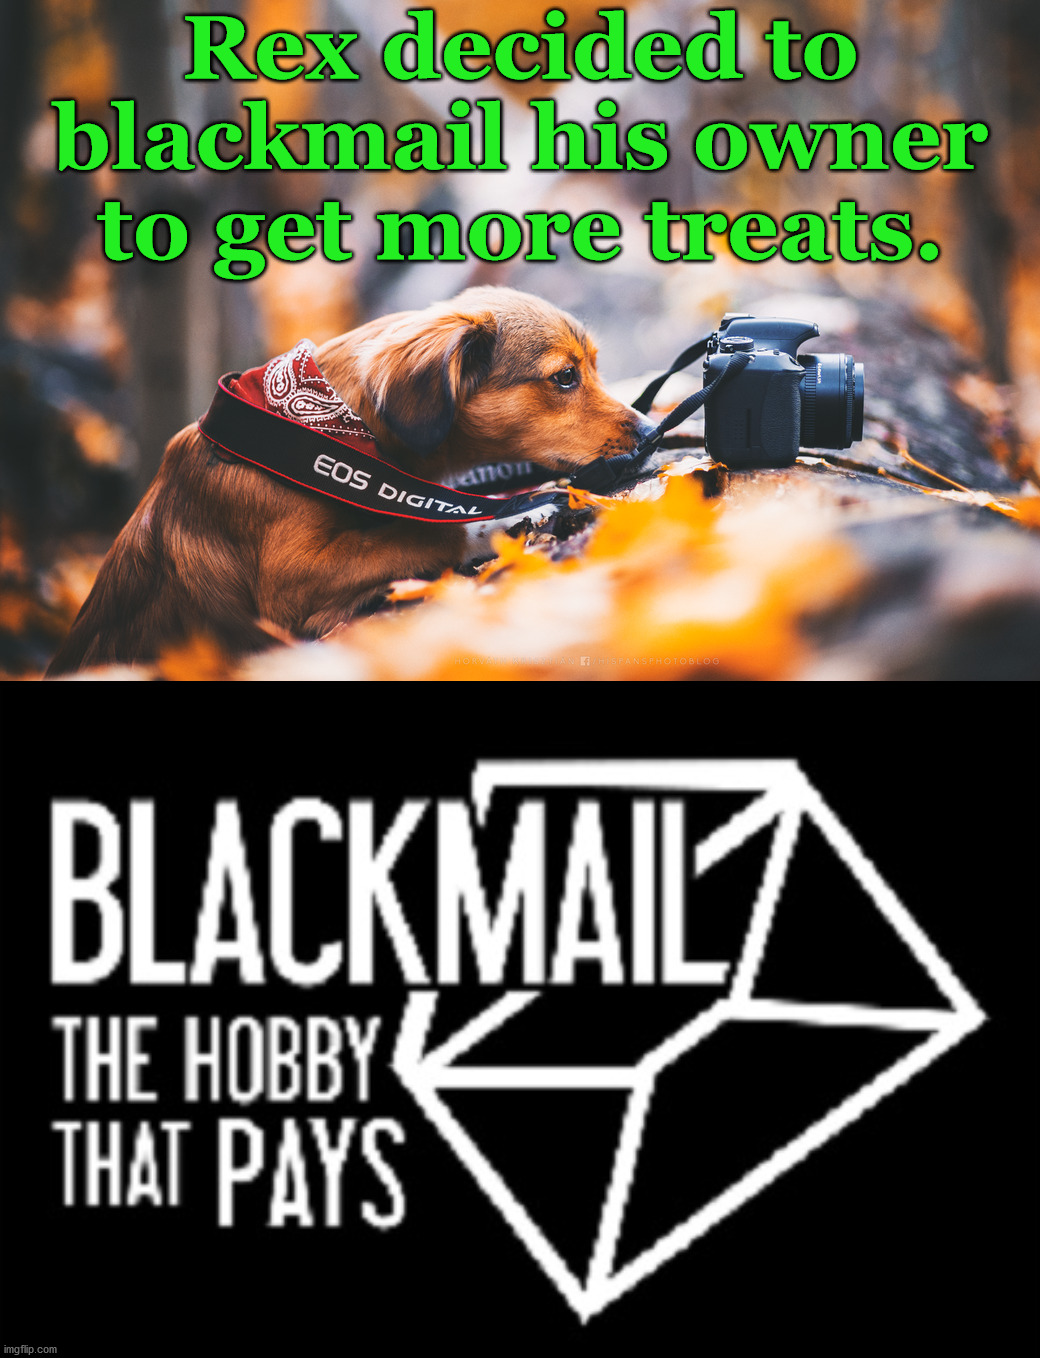 Problem is he had no thumbs to remove the lens cap |  Rex decided to blackmail his owner to get more treats. | image tagged in blackmail,wholesome,dog,treats | made w/ Imgflip meme maker